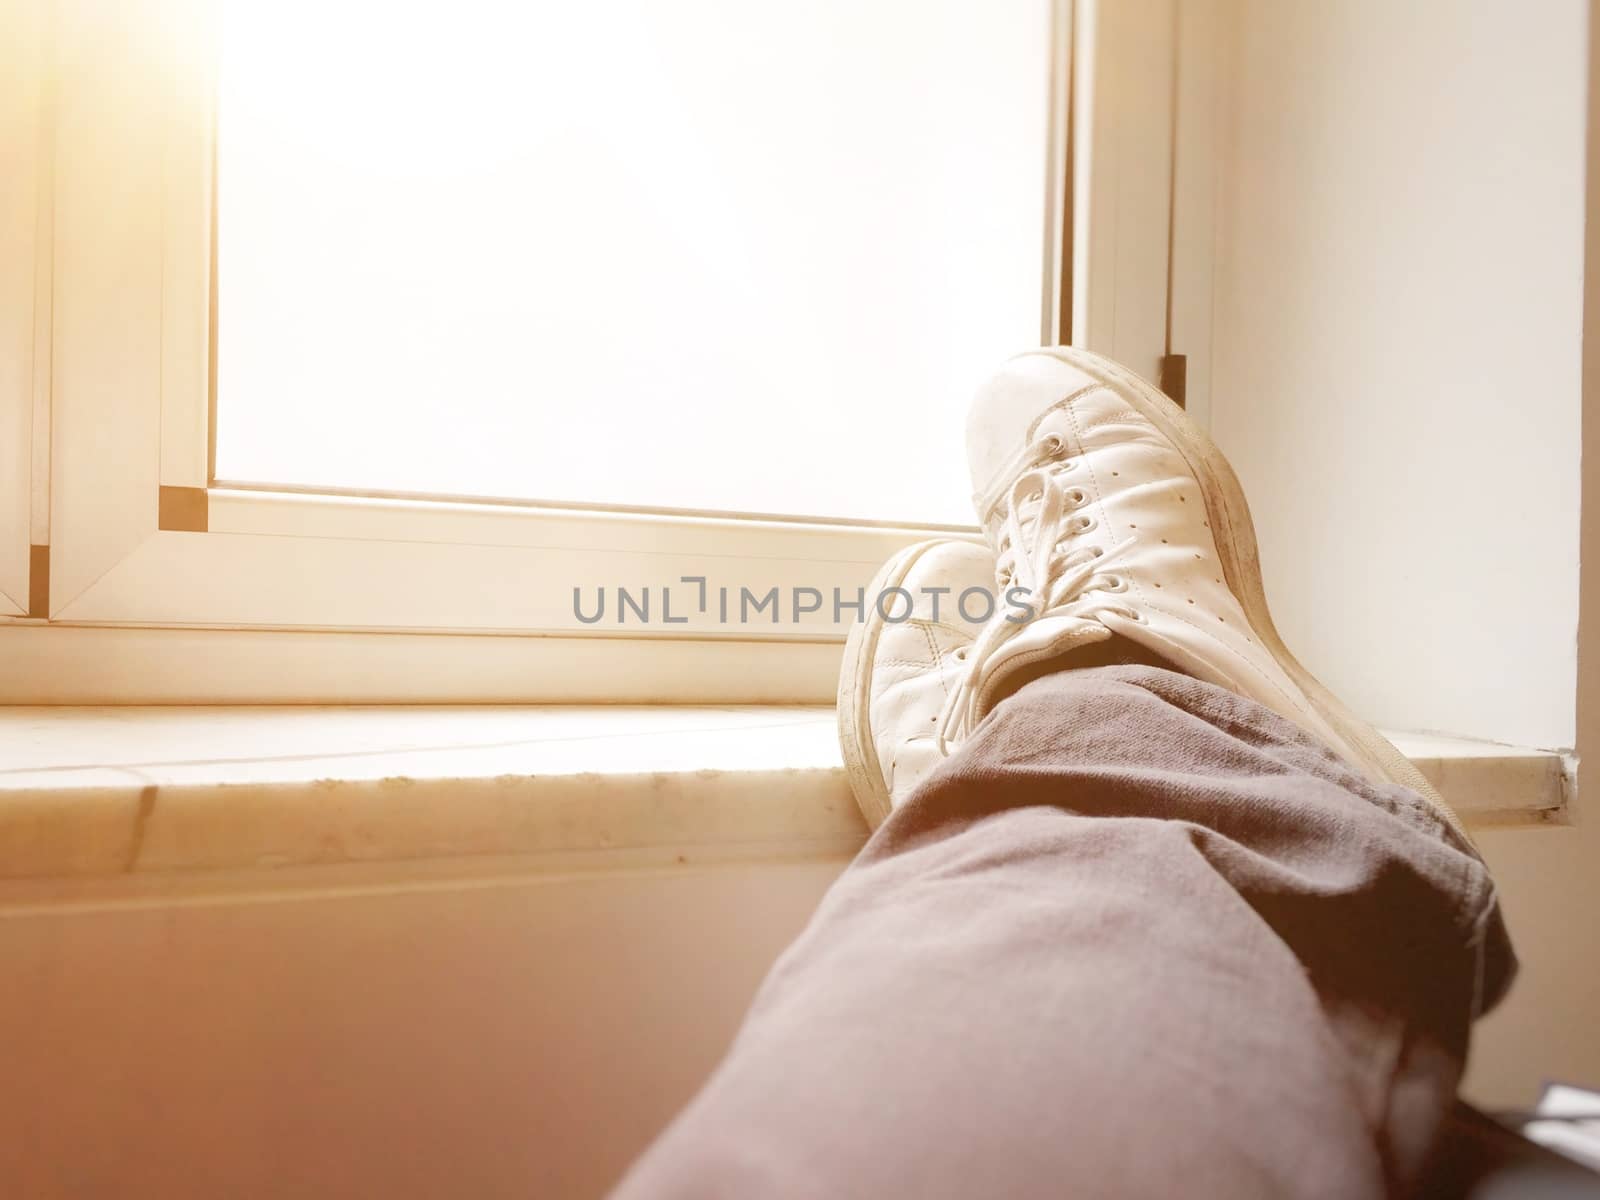 Feet crossed in front of a closed window. Relaxation concept